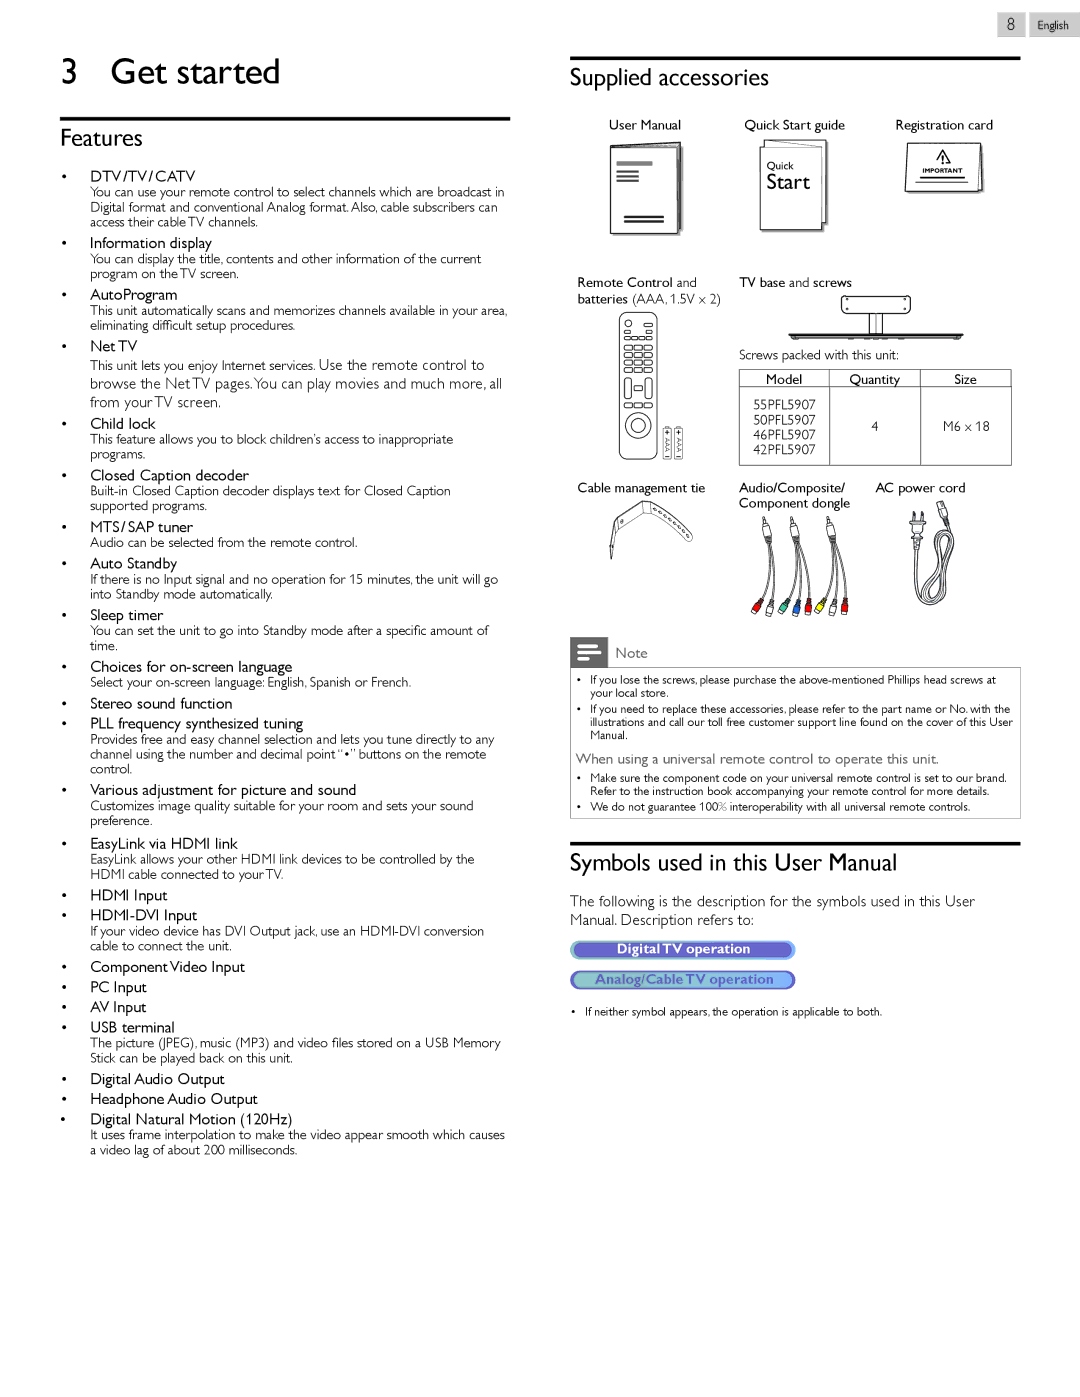 Philips 46PFL5907, 55PFL5907 user manual Get started, Features, Supplied accessories, DTV /TV / Catv 